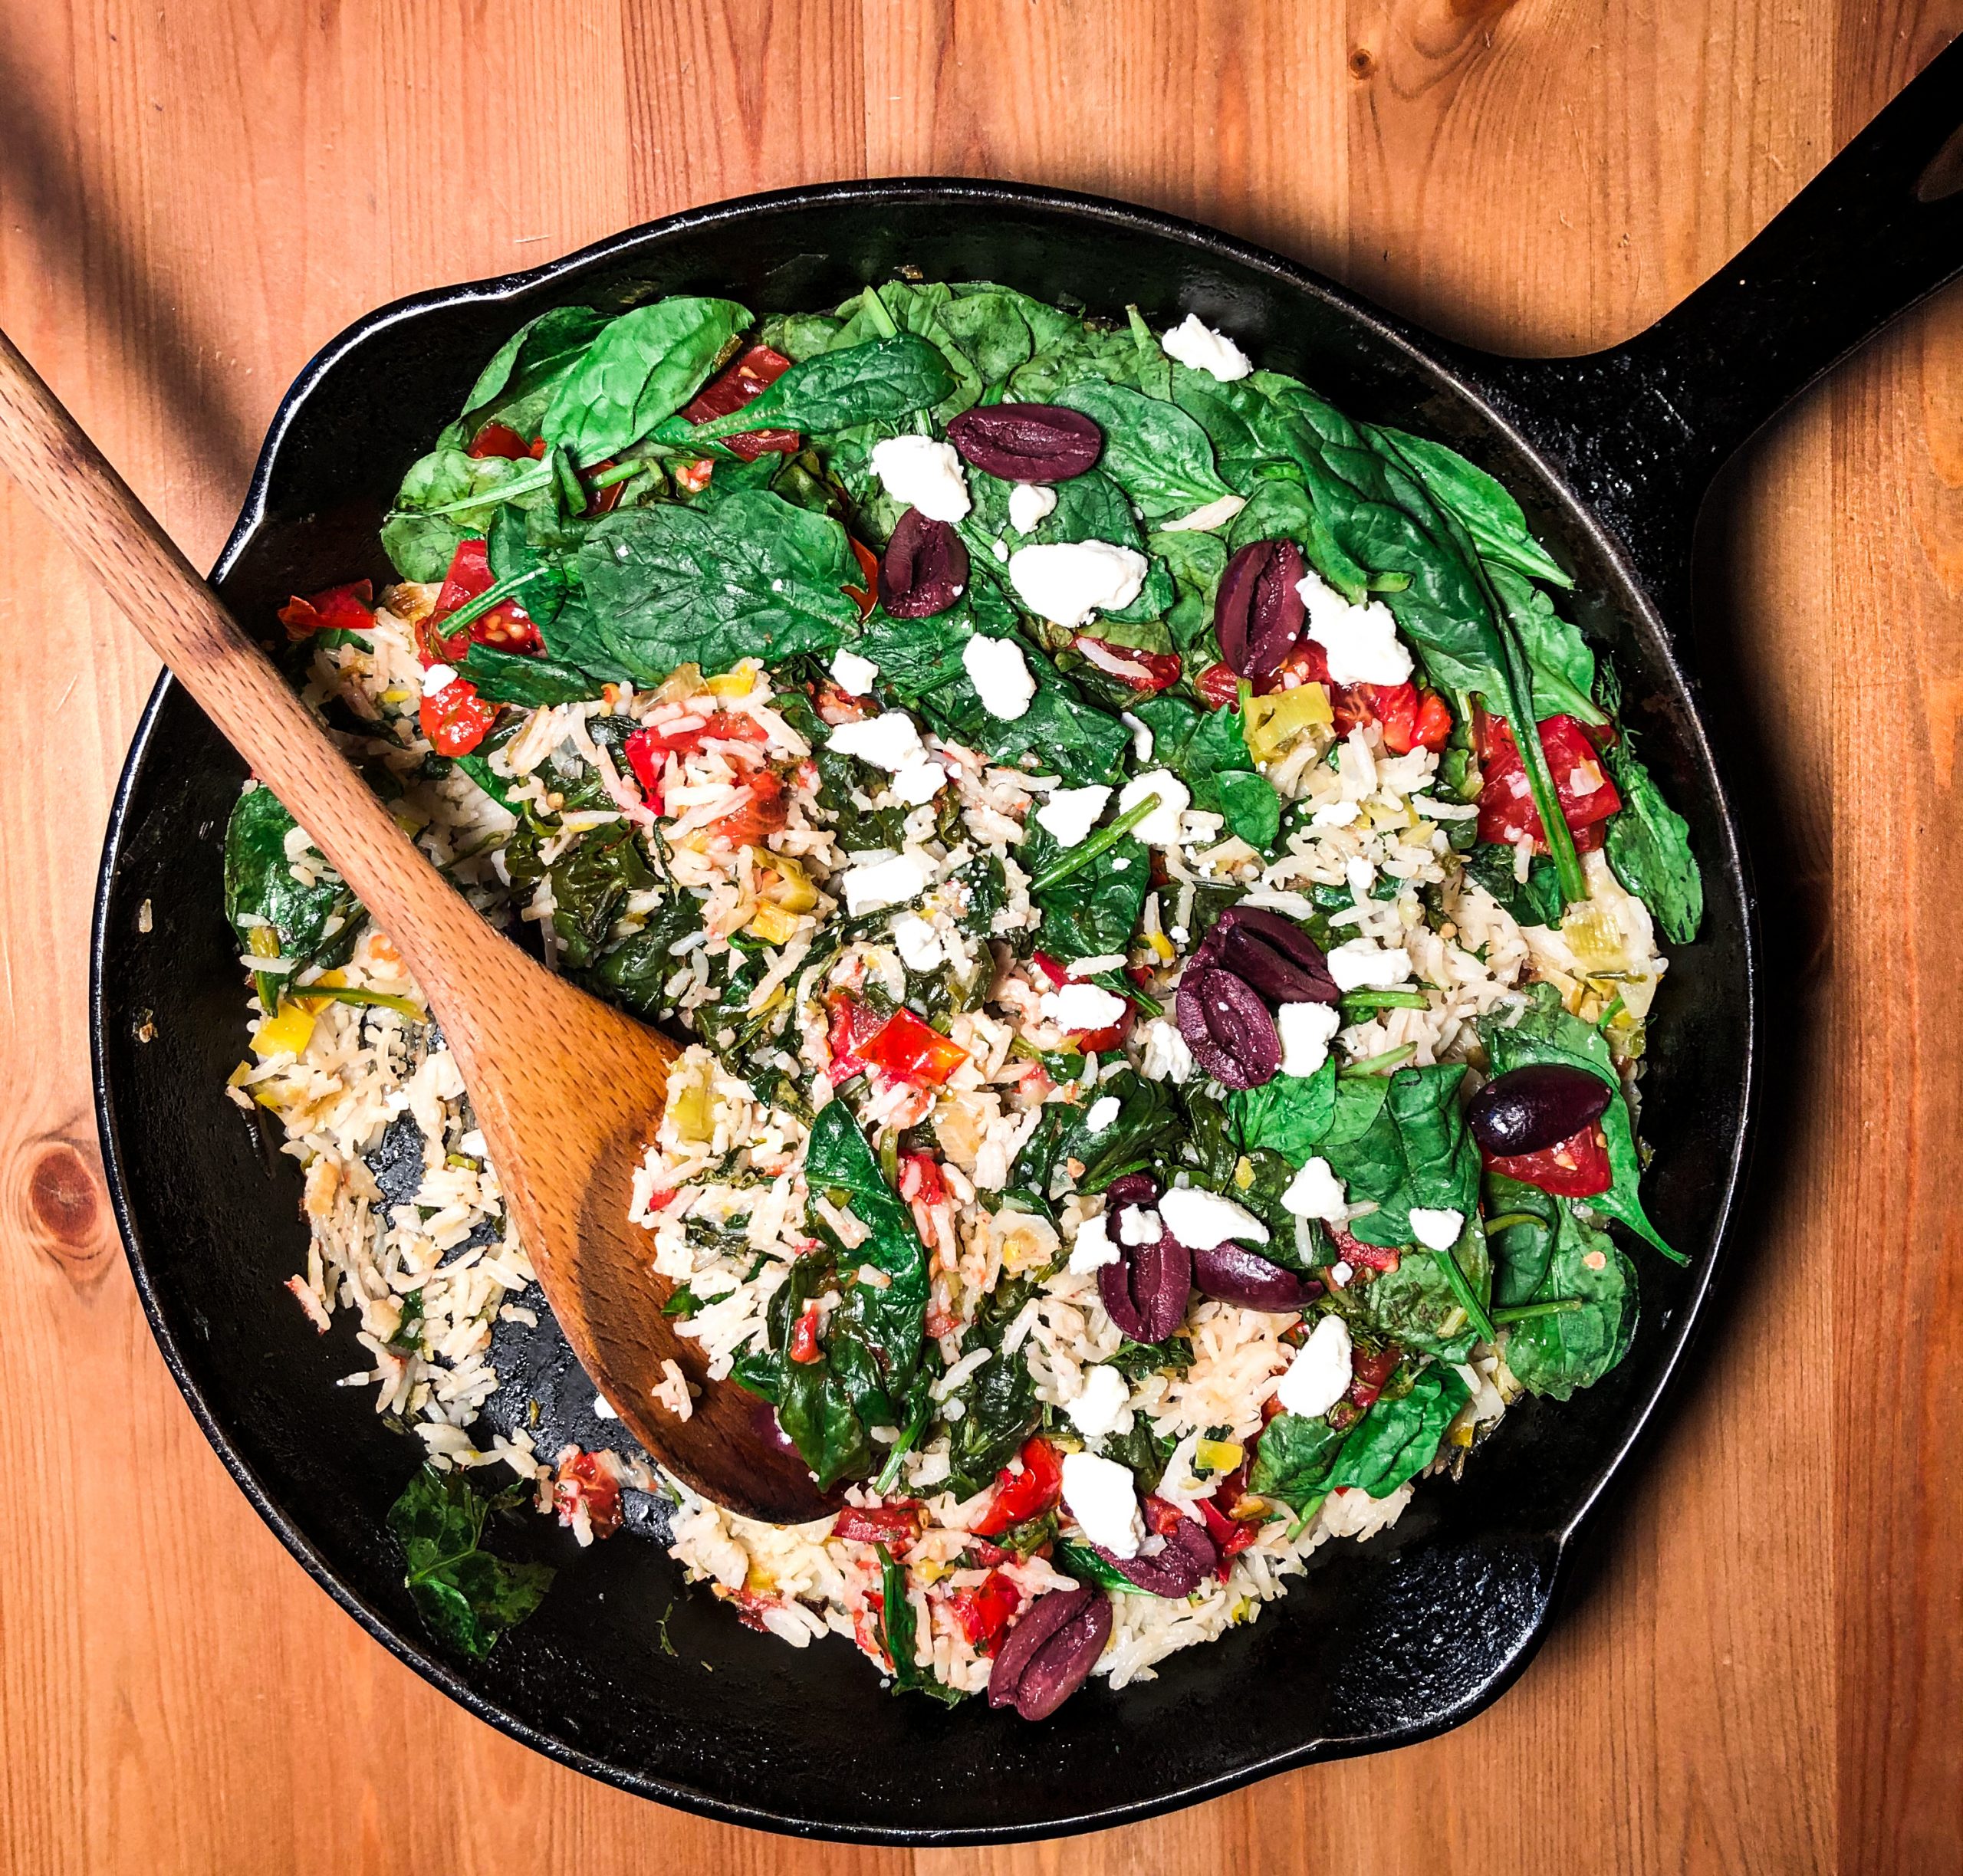 ARROZ kon SPINAKA: Greek Sephardic Rice with Spinach, Tomatoes, Feta and Dill